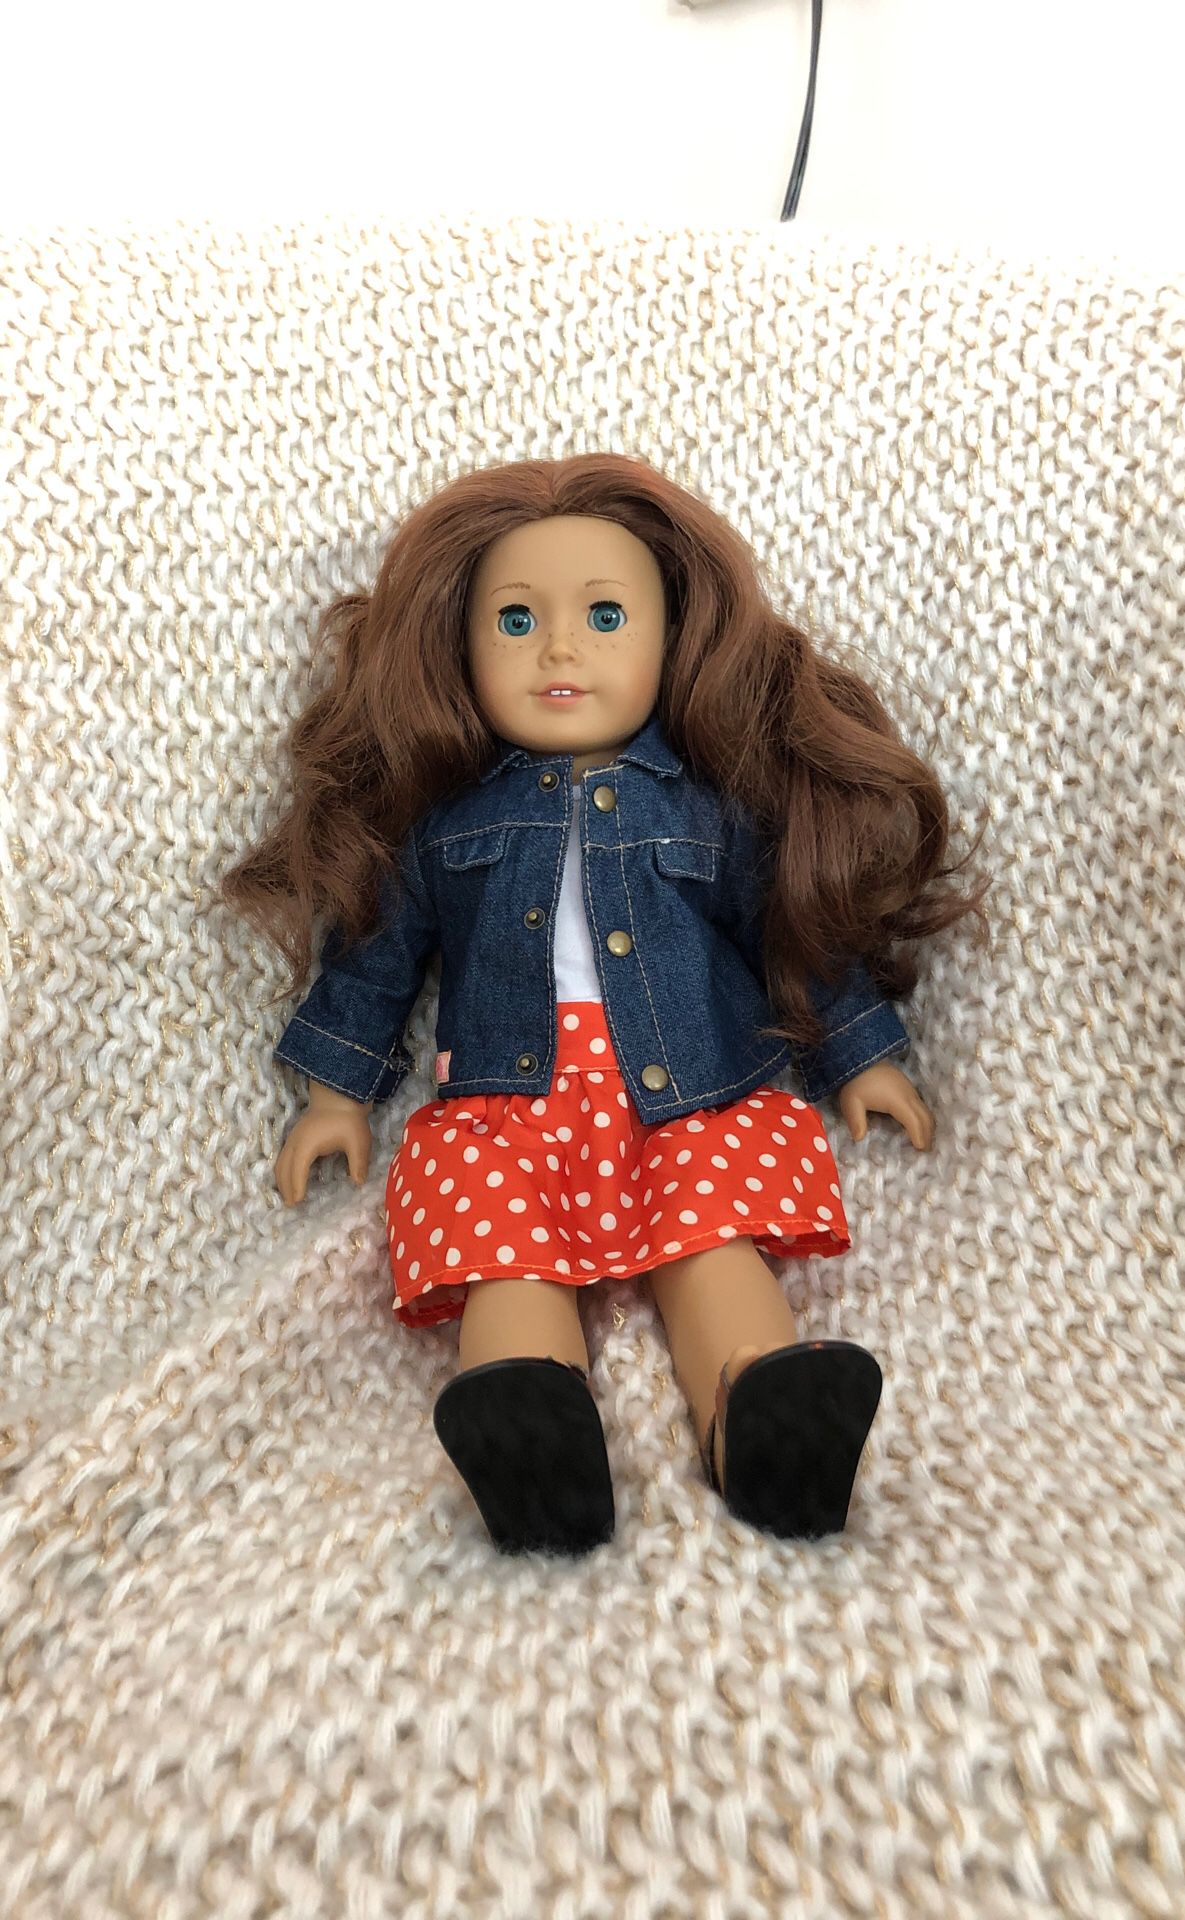 Saige American girl doll, ears pierced and comes with shirt